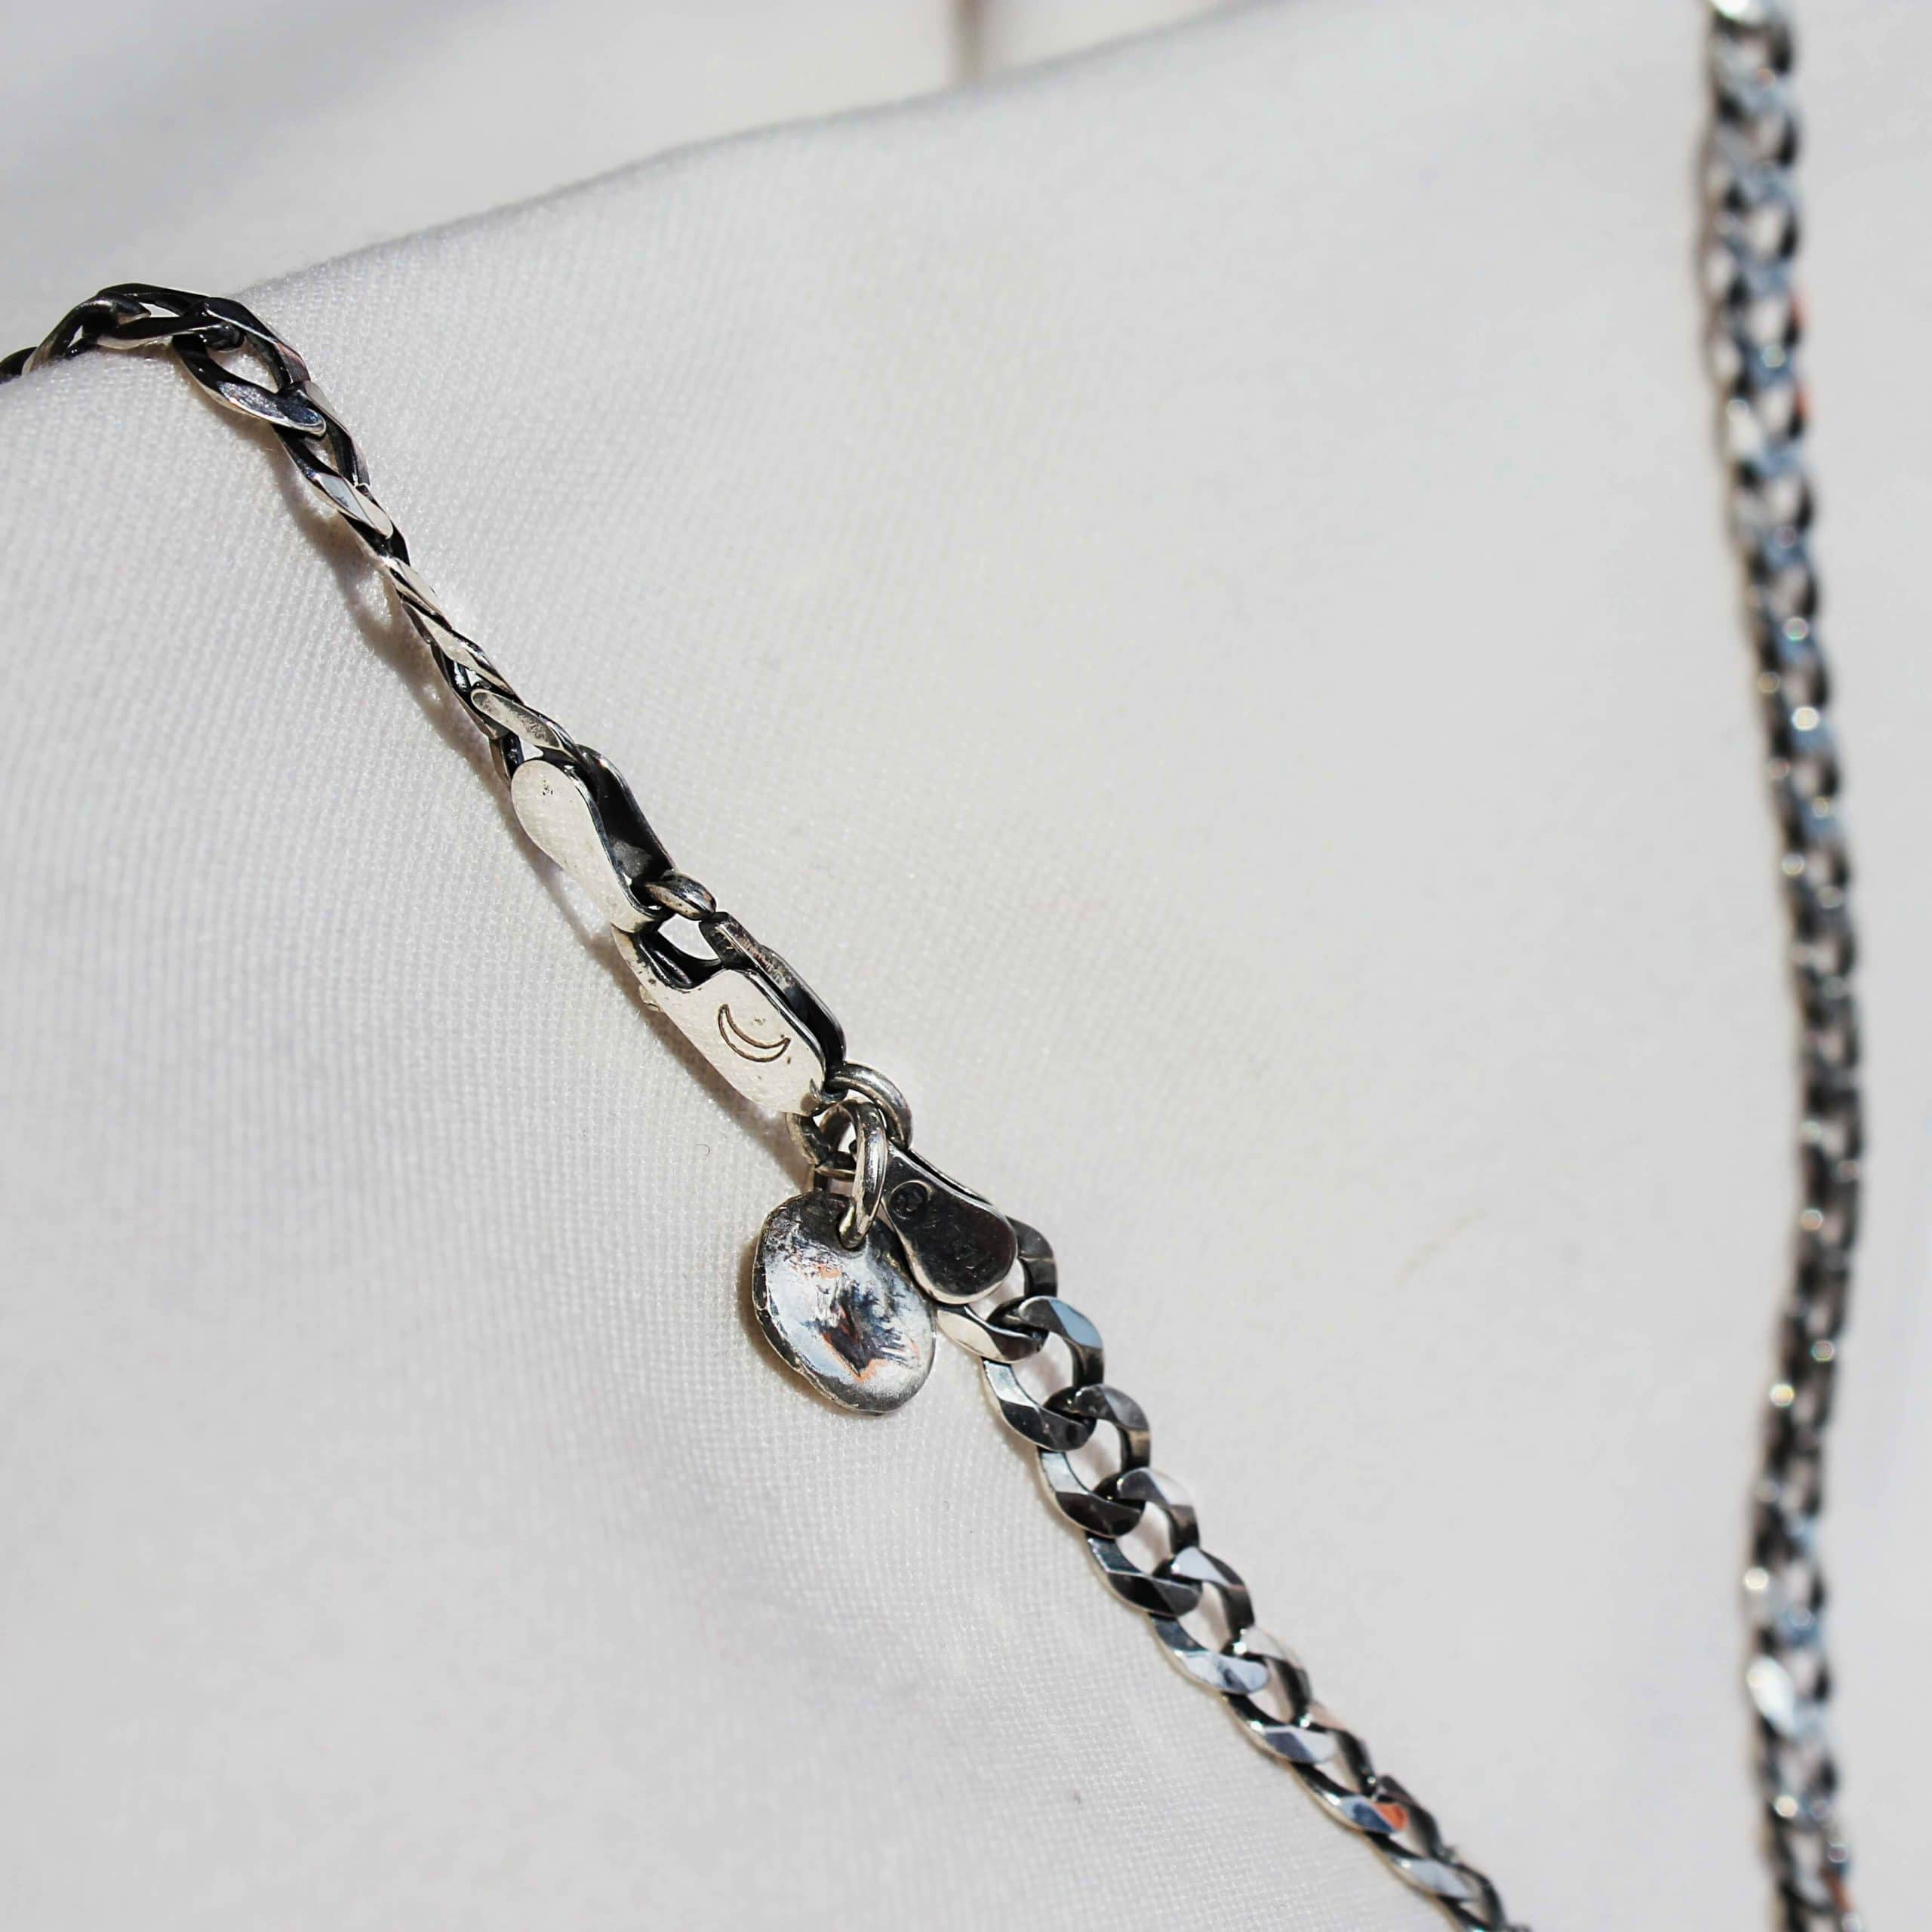 A silver necklace with Moon pendant on whie material